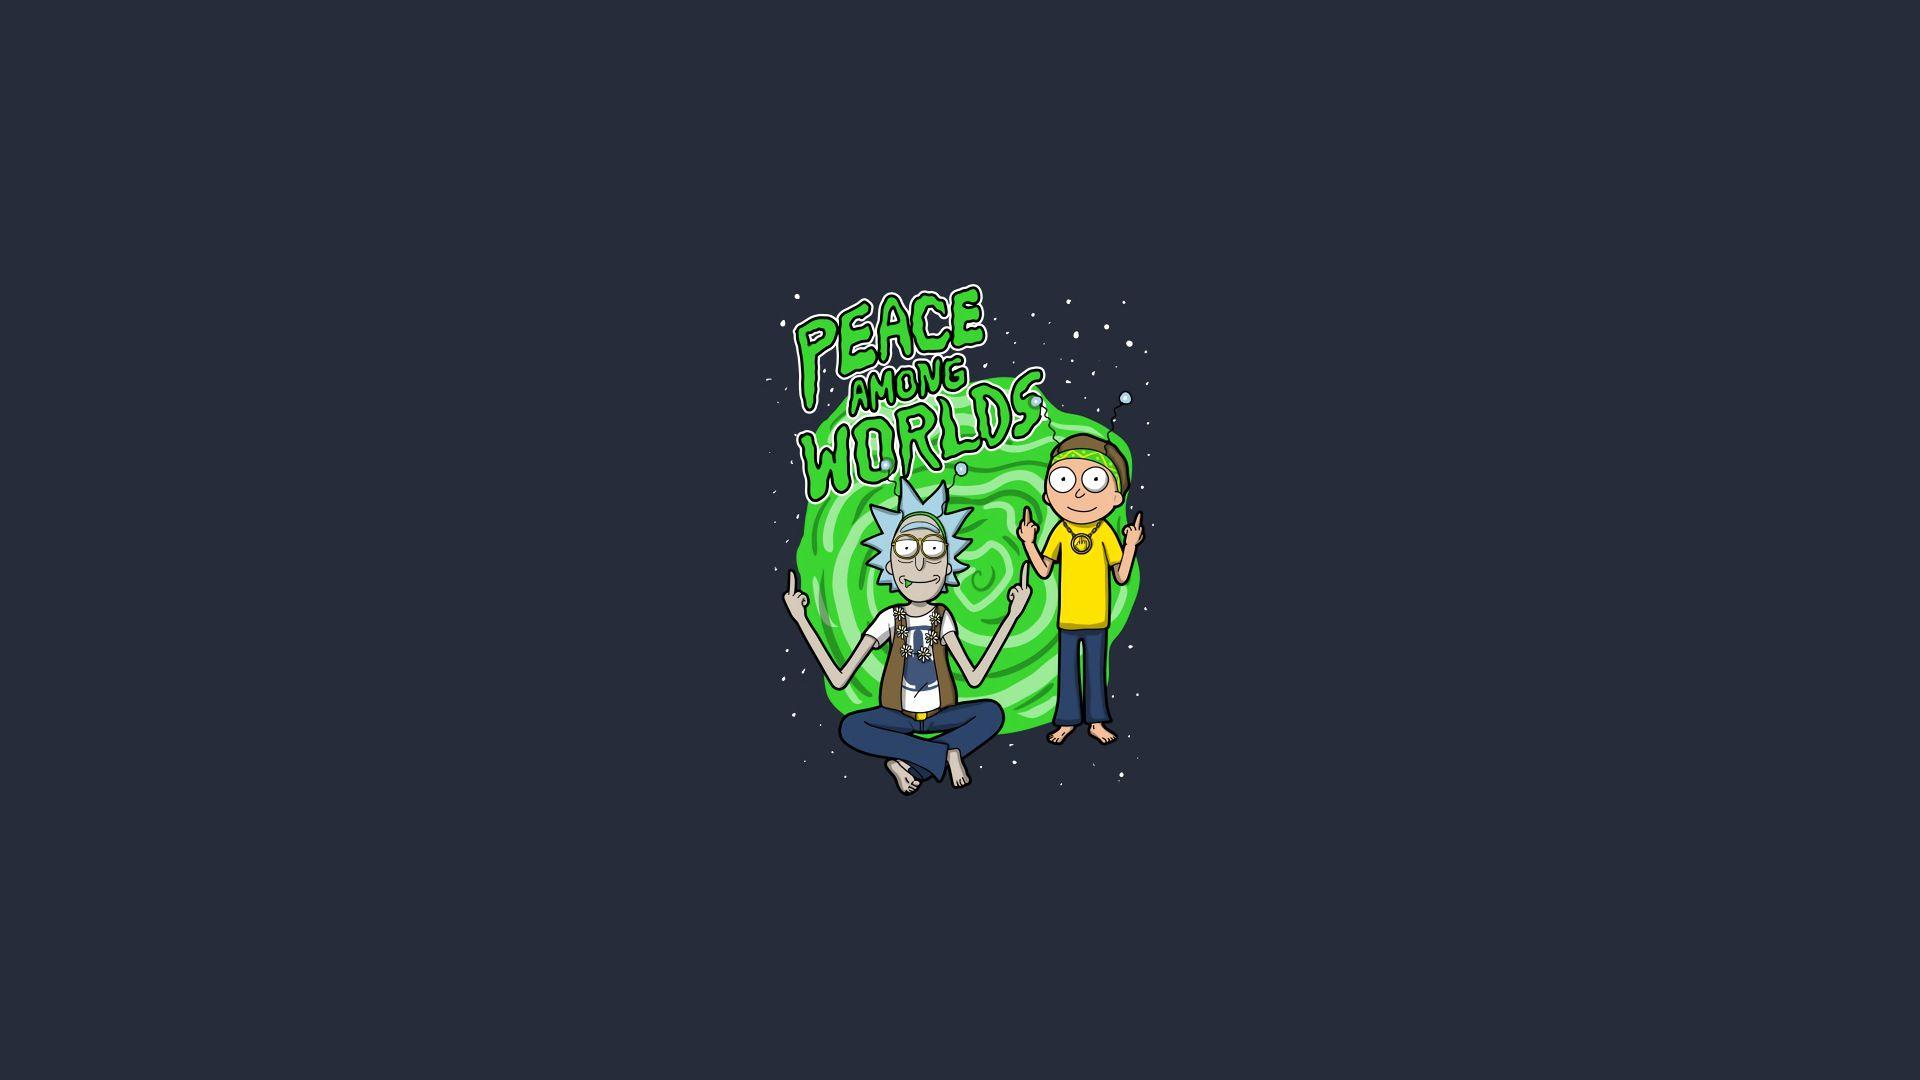 Portrait Rick And Morty Wallpapers Top Free Portrait Rick And Morty Backgrounds Wallpaperaccess